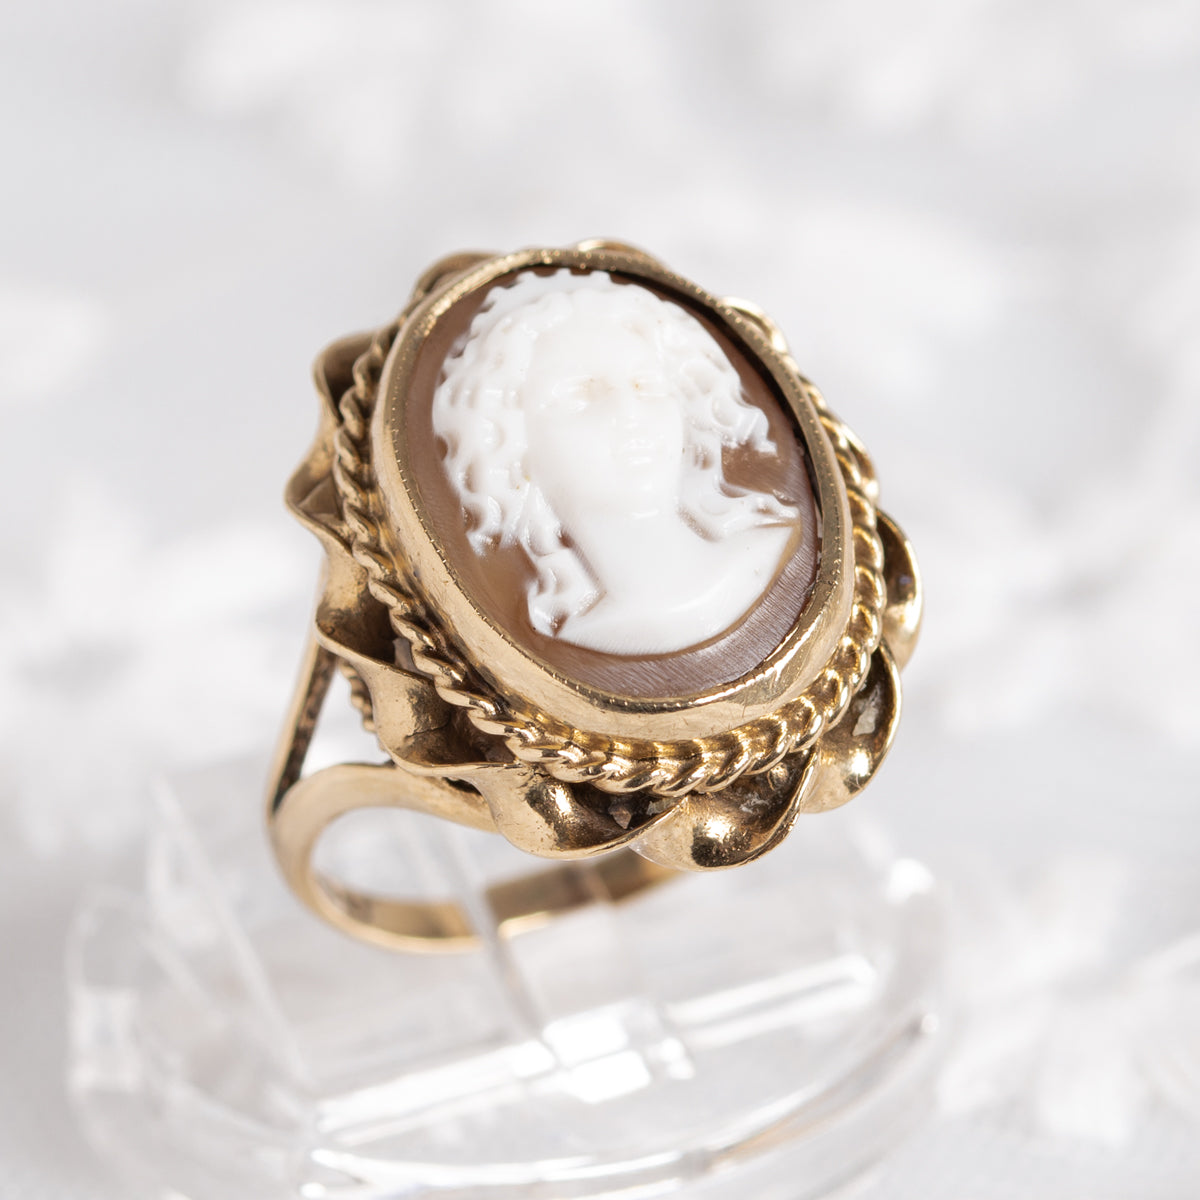 Vintage 9ct Gold Cameo Ring Female Portrait 1970 s Hallmarked UK Size M (A1354)